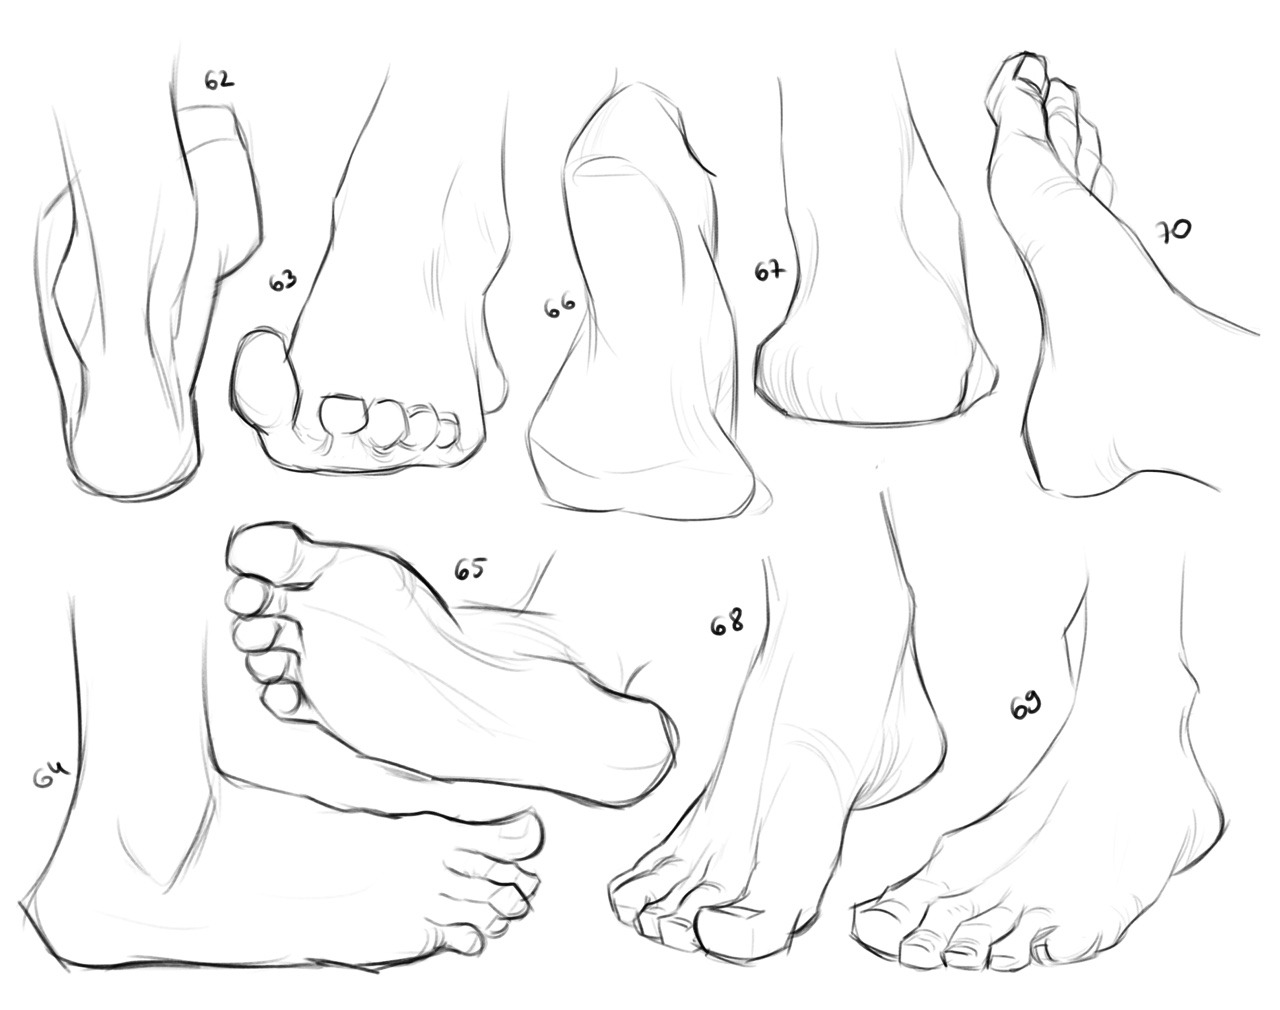 It's all alright — Tumblr wont let me upload all the feet I drew for...